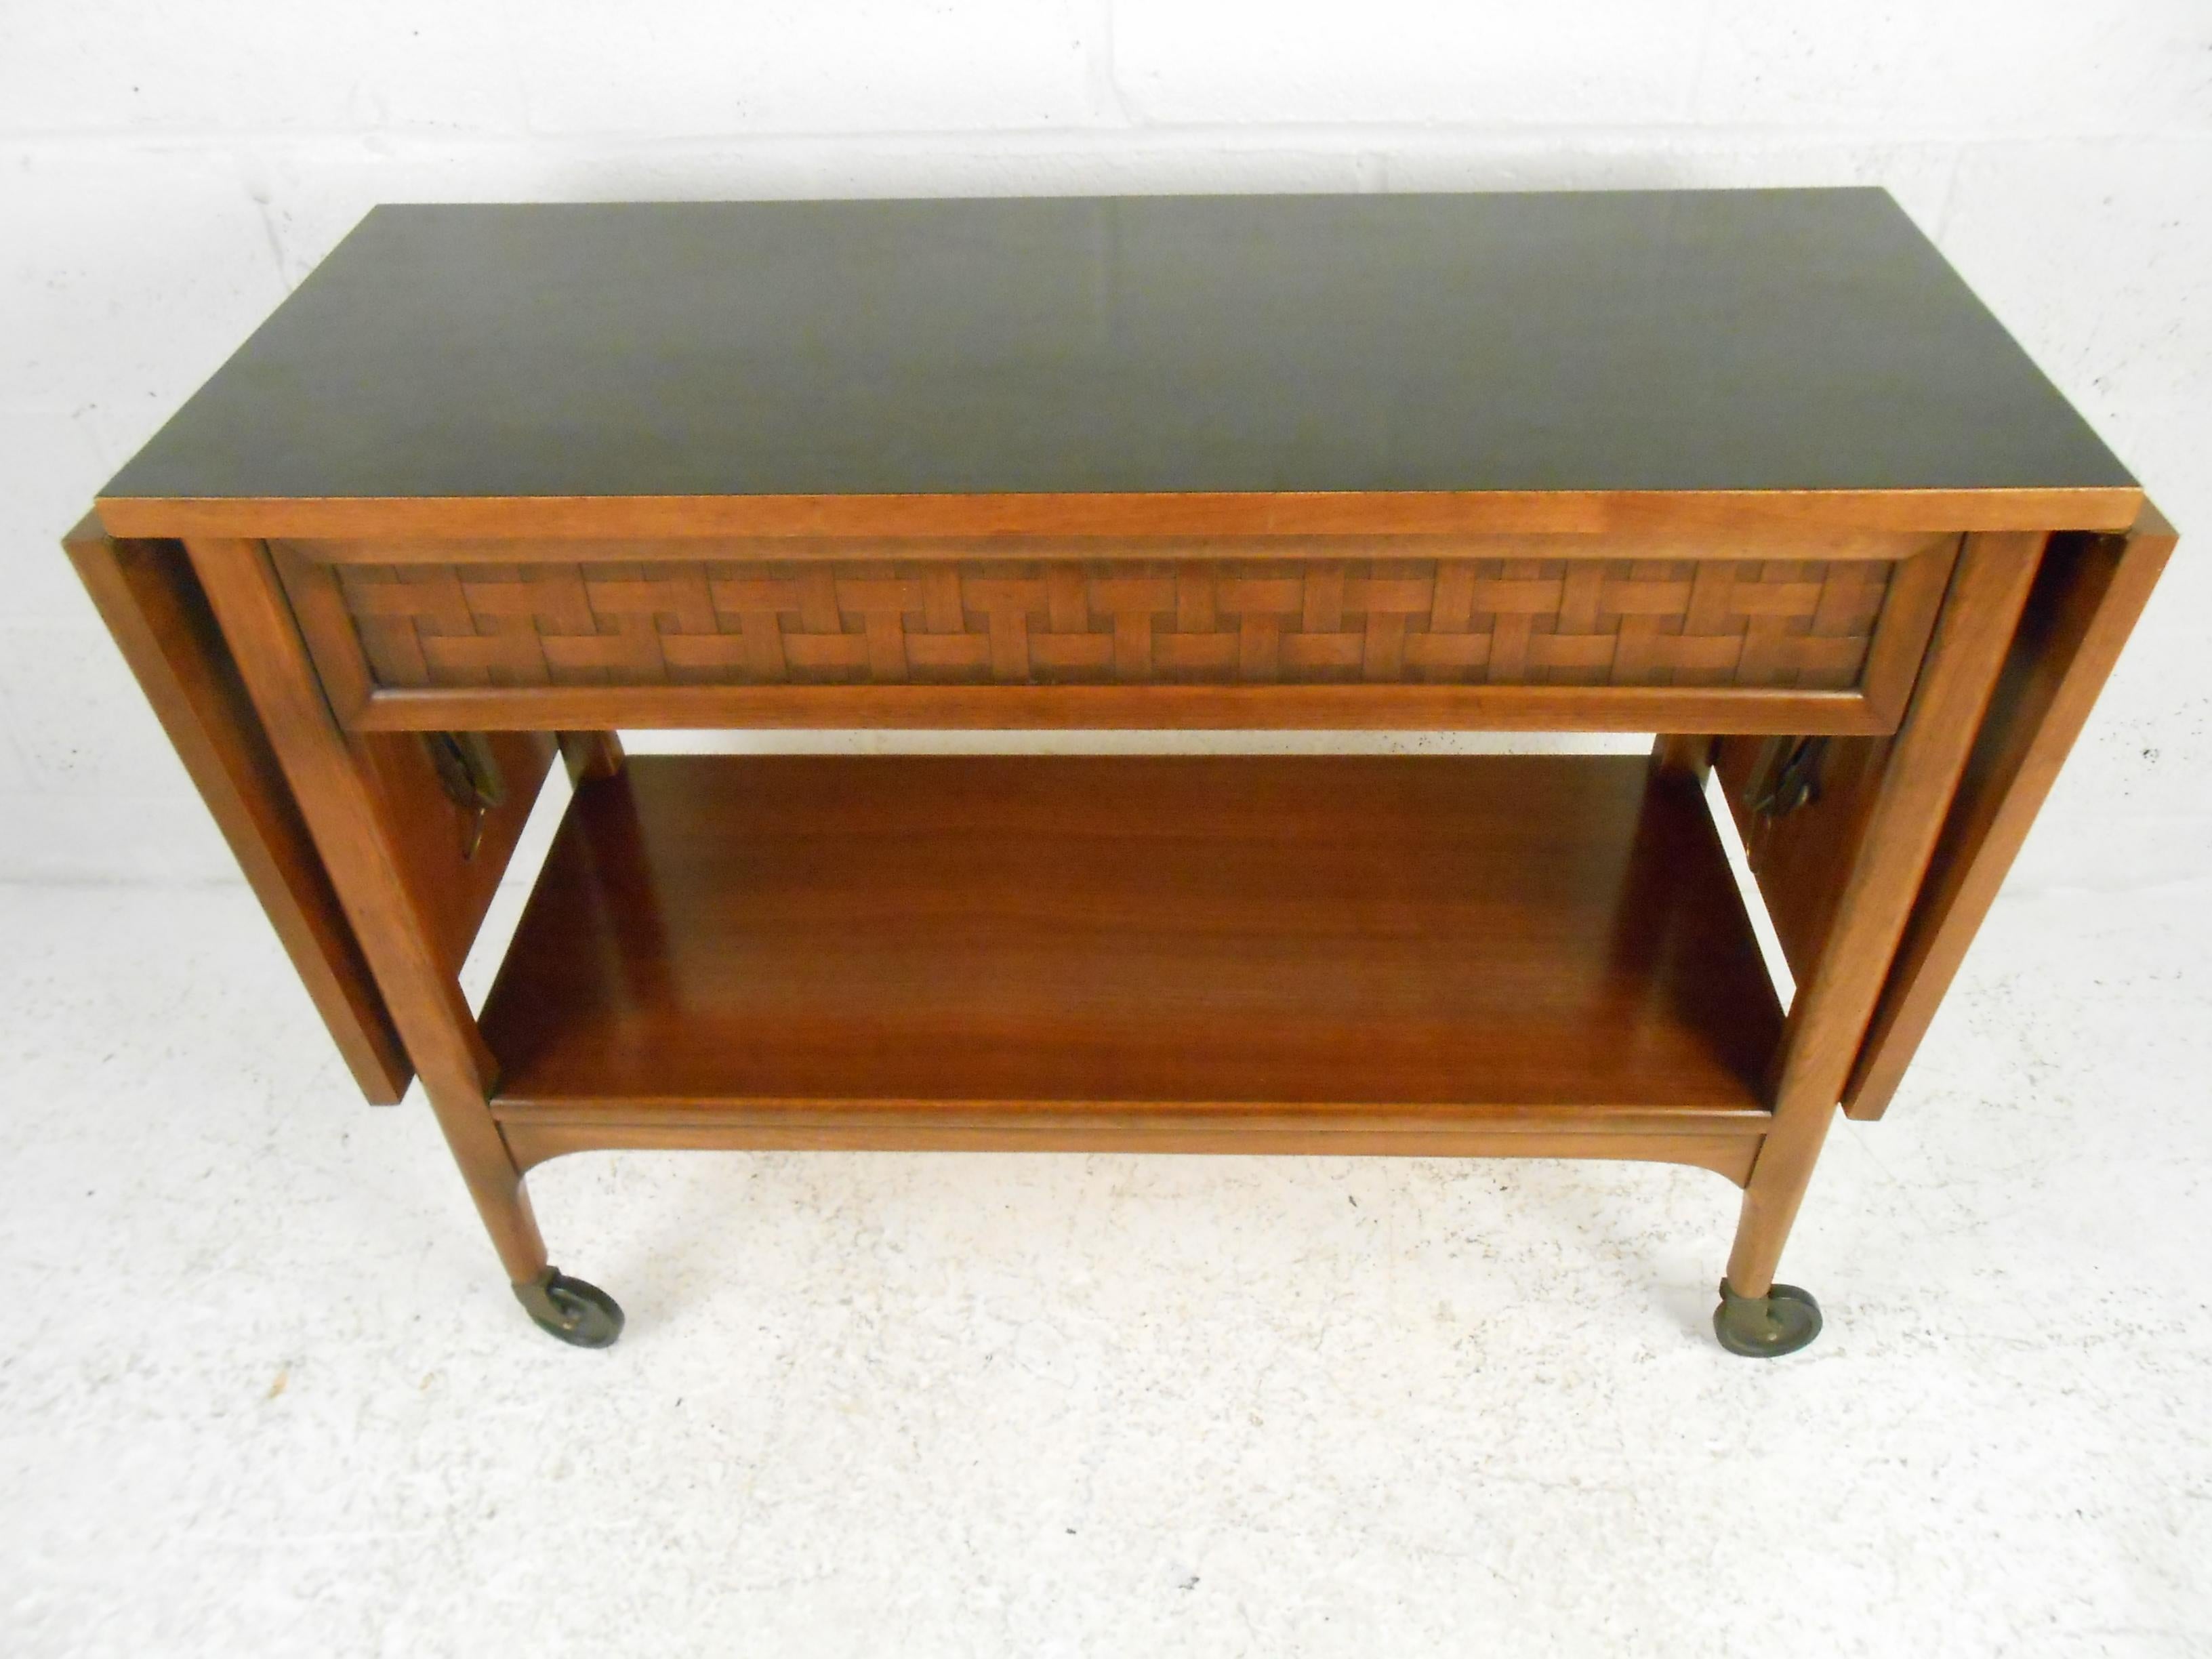 Handsome Mid-Century Modern serving cart manufactured by Lane Furniture Company in Altavista, Virginia. Drop-leaf extensions on either side of the tabletop extend the table's surface from 36